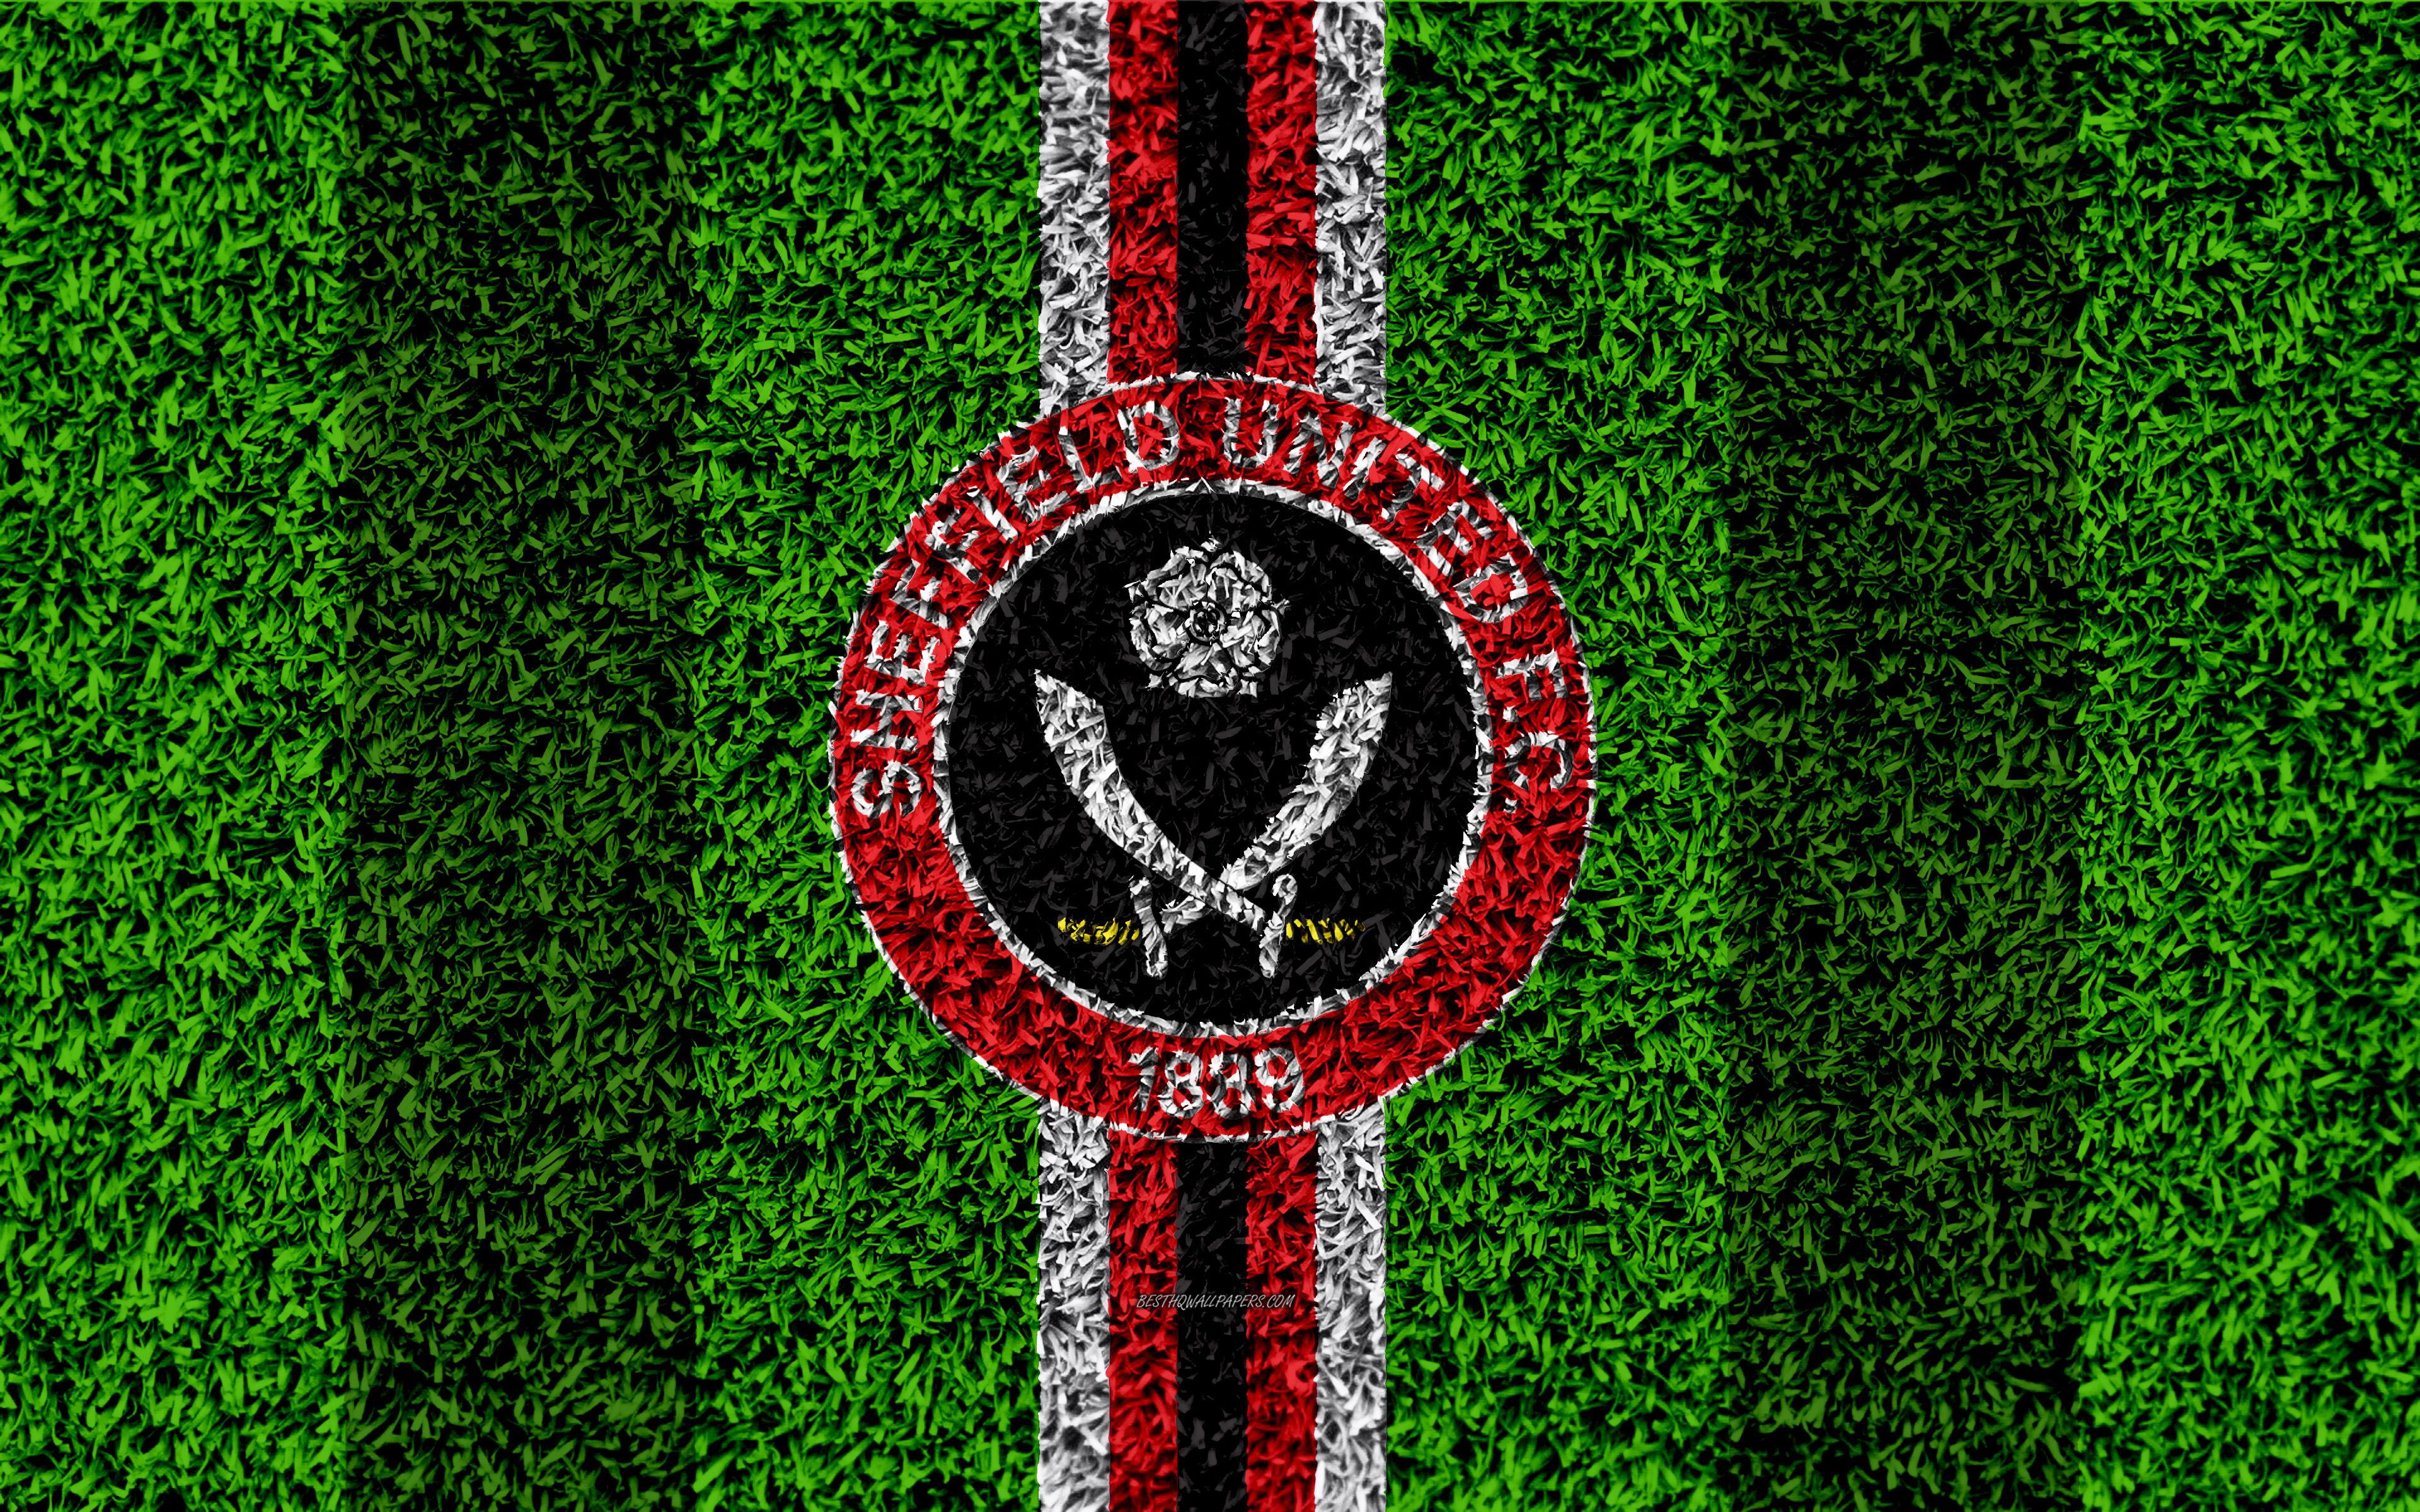 Sheffield United F.C. Wallpapers - Wallpaper Cave